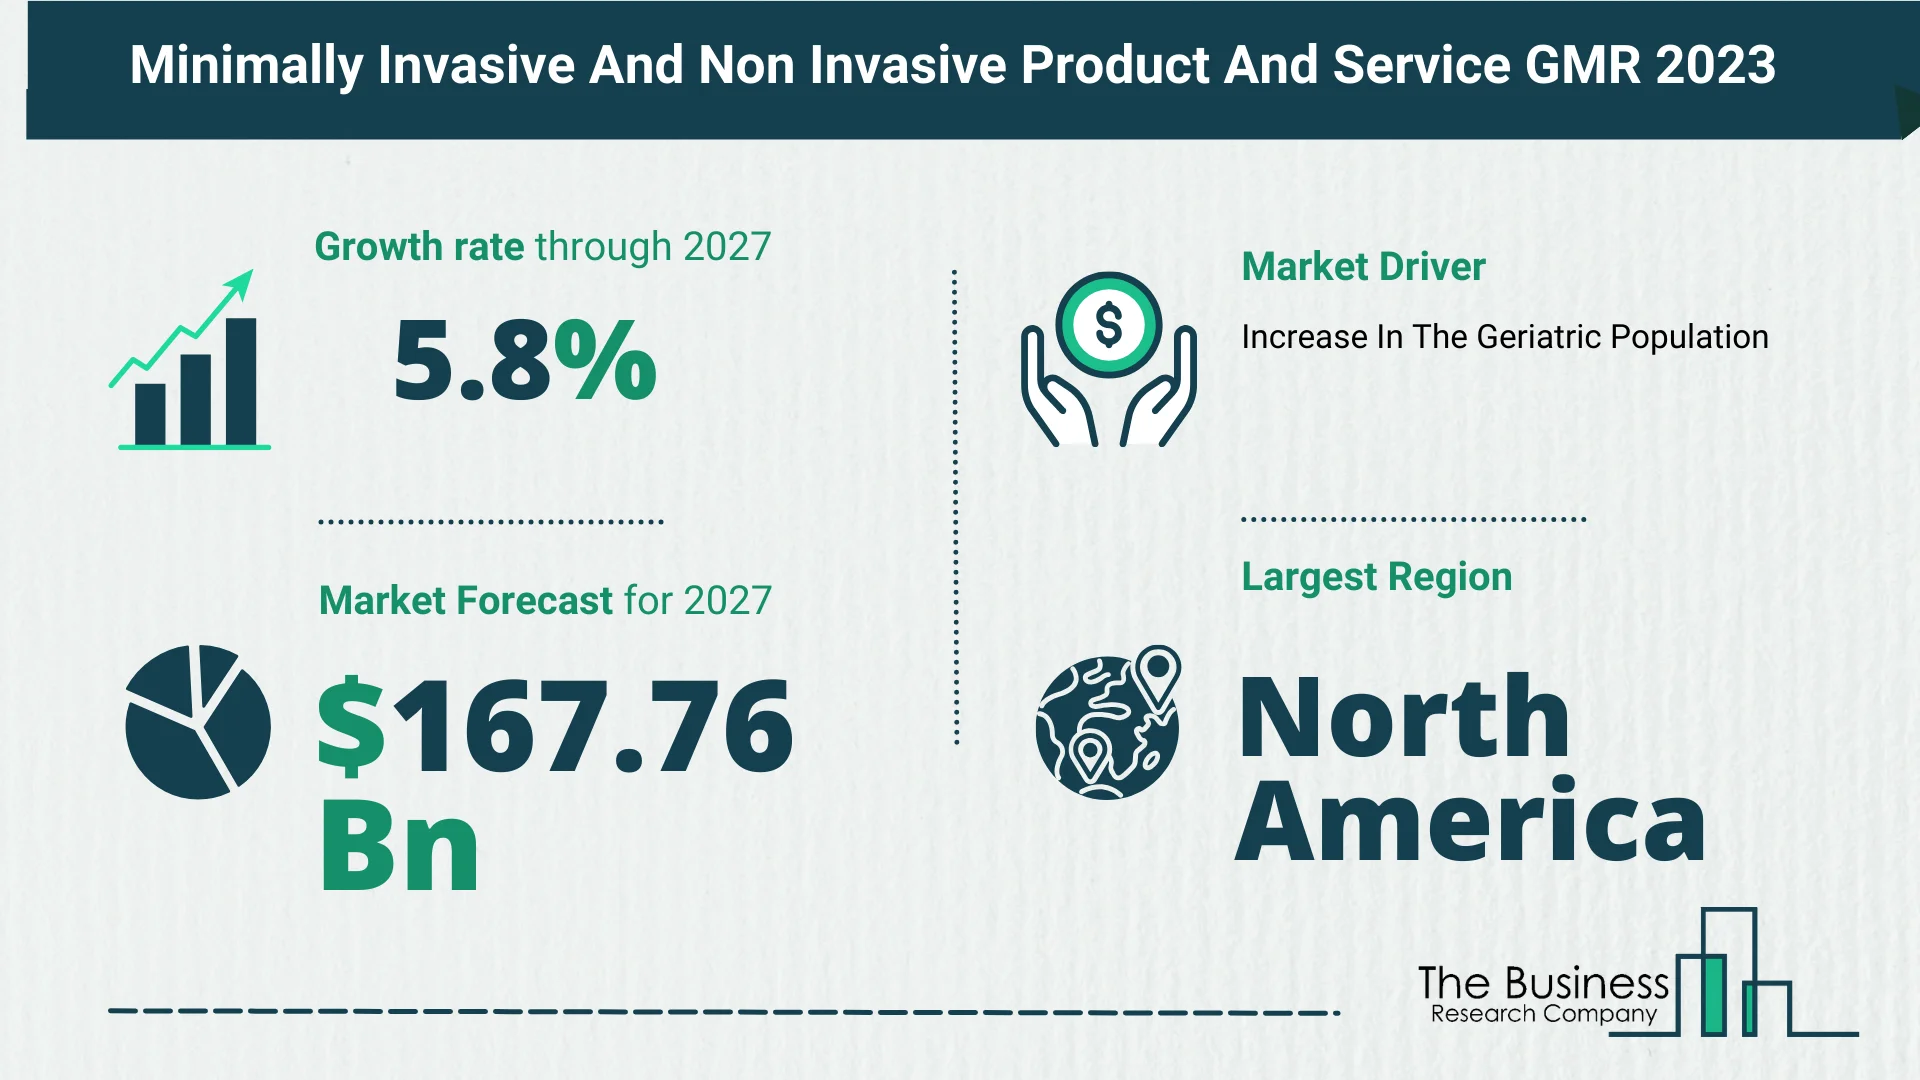 Minimally Invasive And Non Invasive Product And Service Market Size